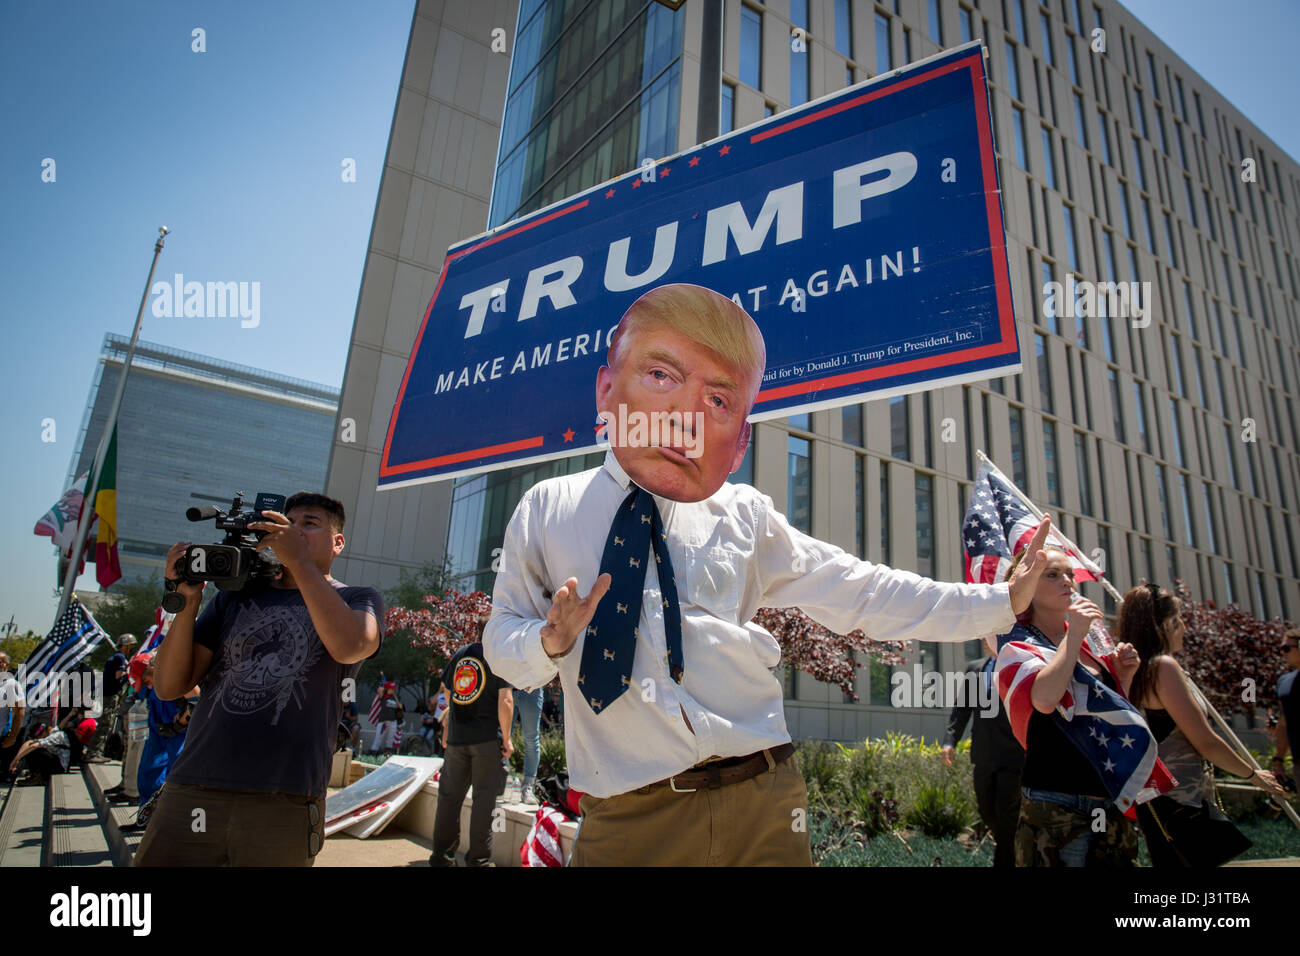 Los Angeles, USA. 1st May, 2017. Man with Donald Trump mask at May Day rally in Downtown Los Angeles, California, May 1st, 2017. Credit: Jim Newberry/Alamy Live News Stock Photo